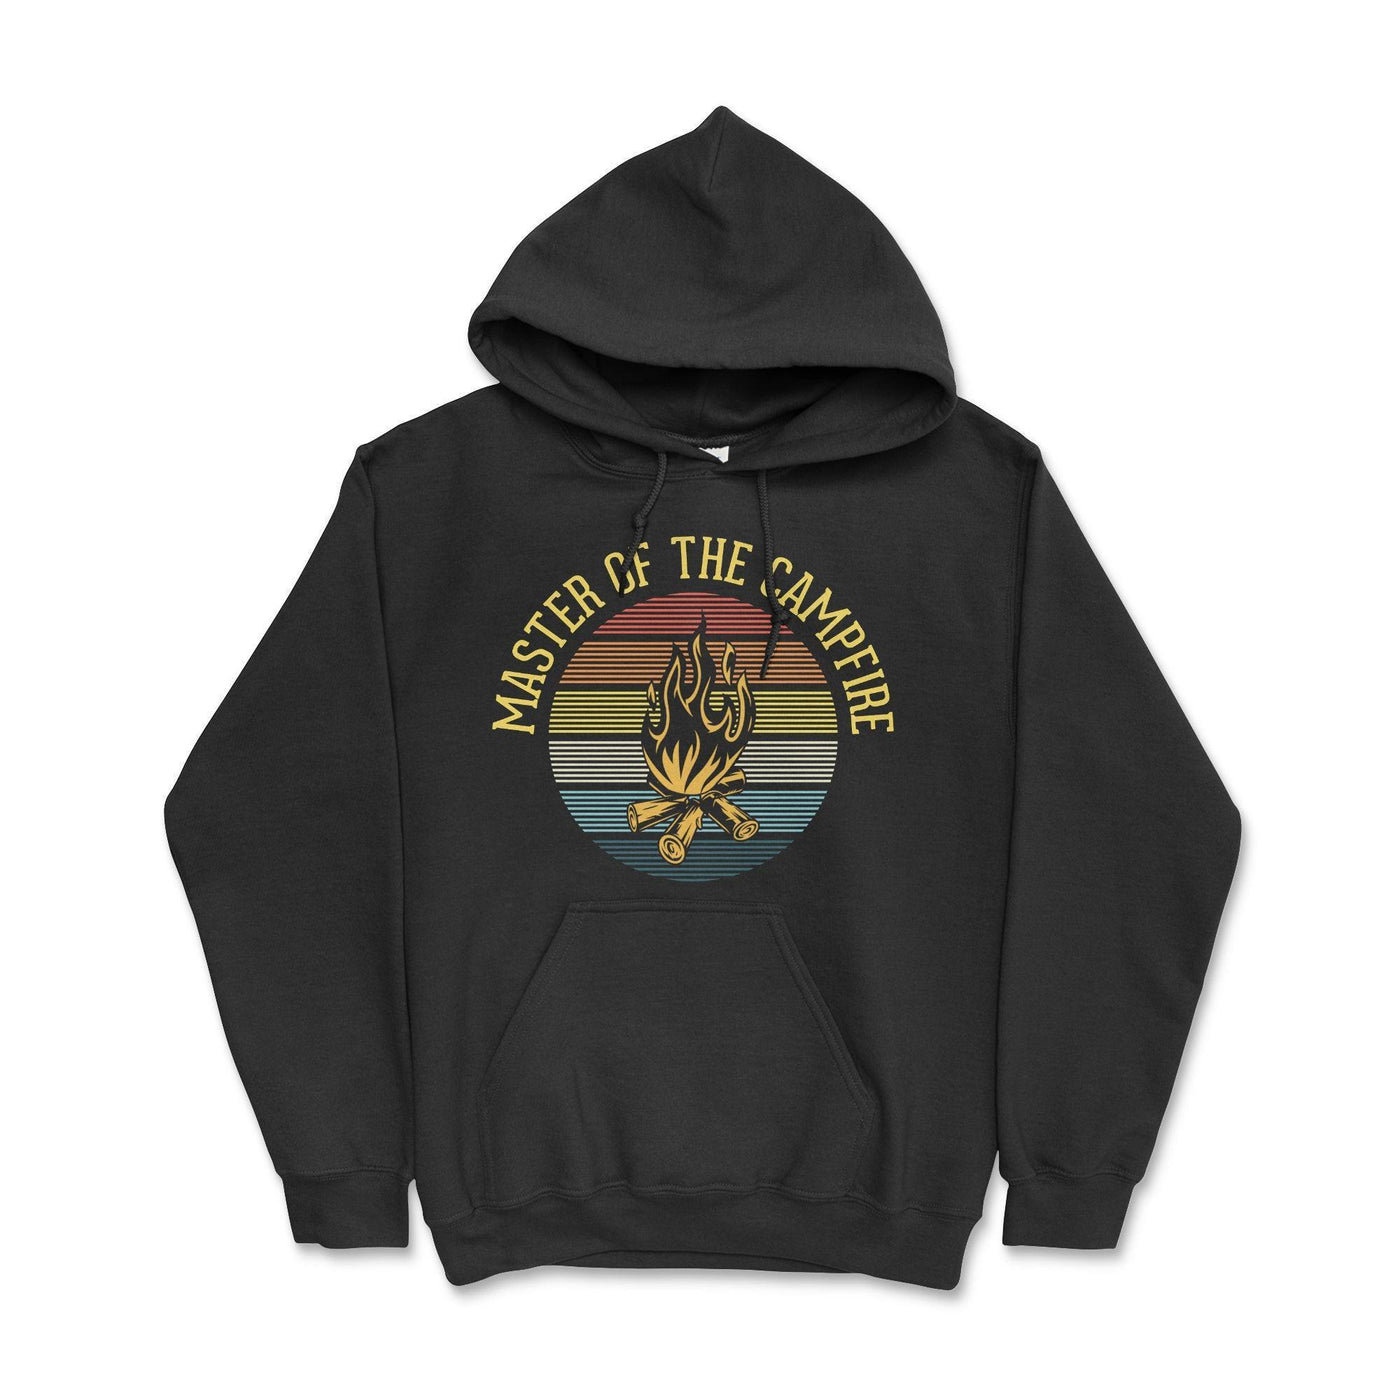 Master of the Campfire Hoodie - Goats Trail